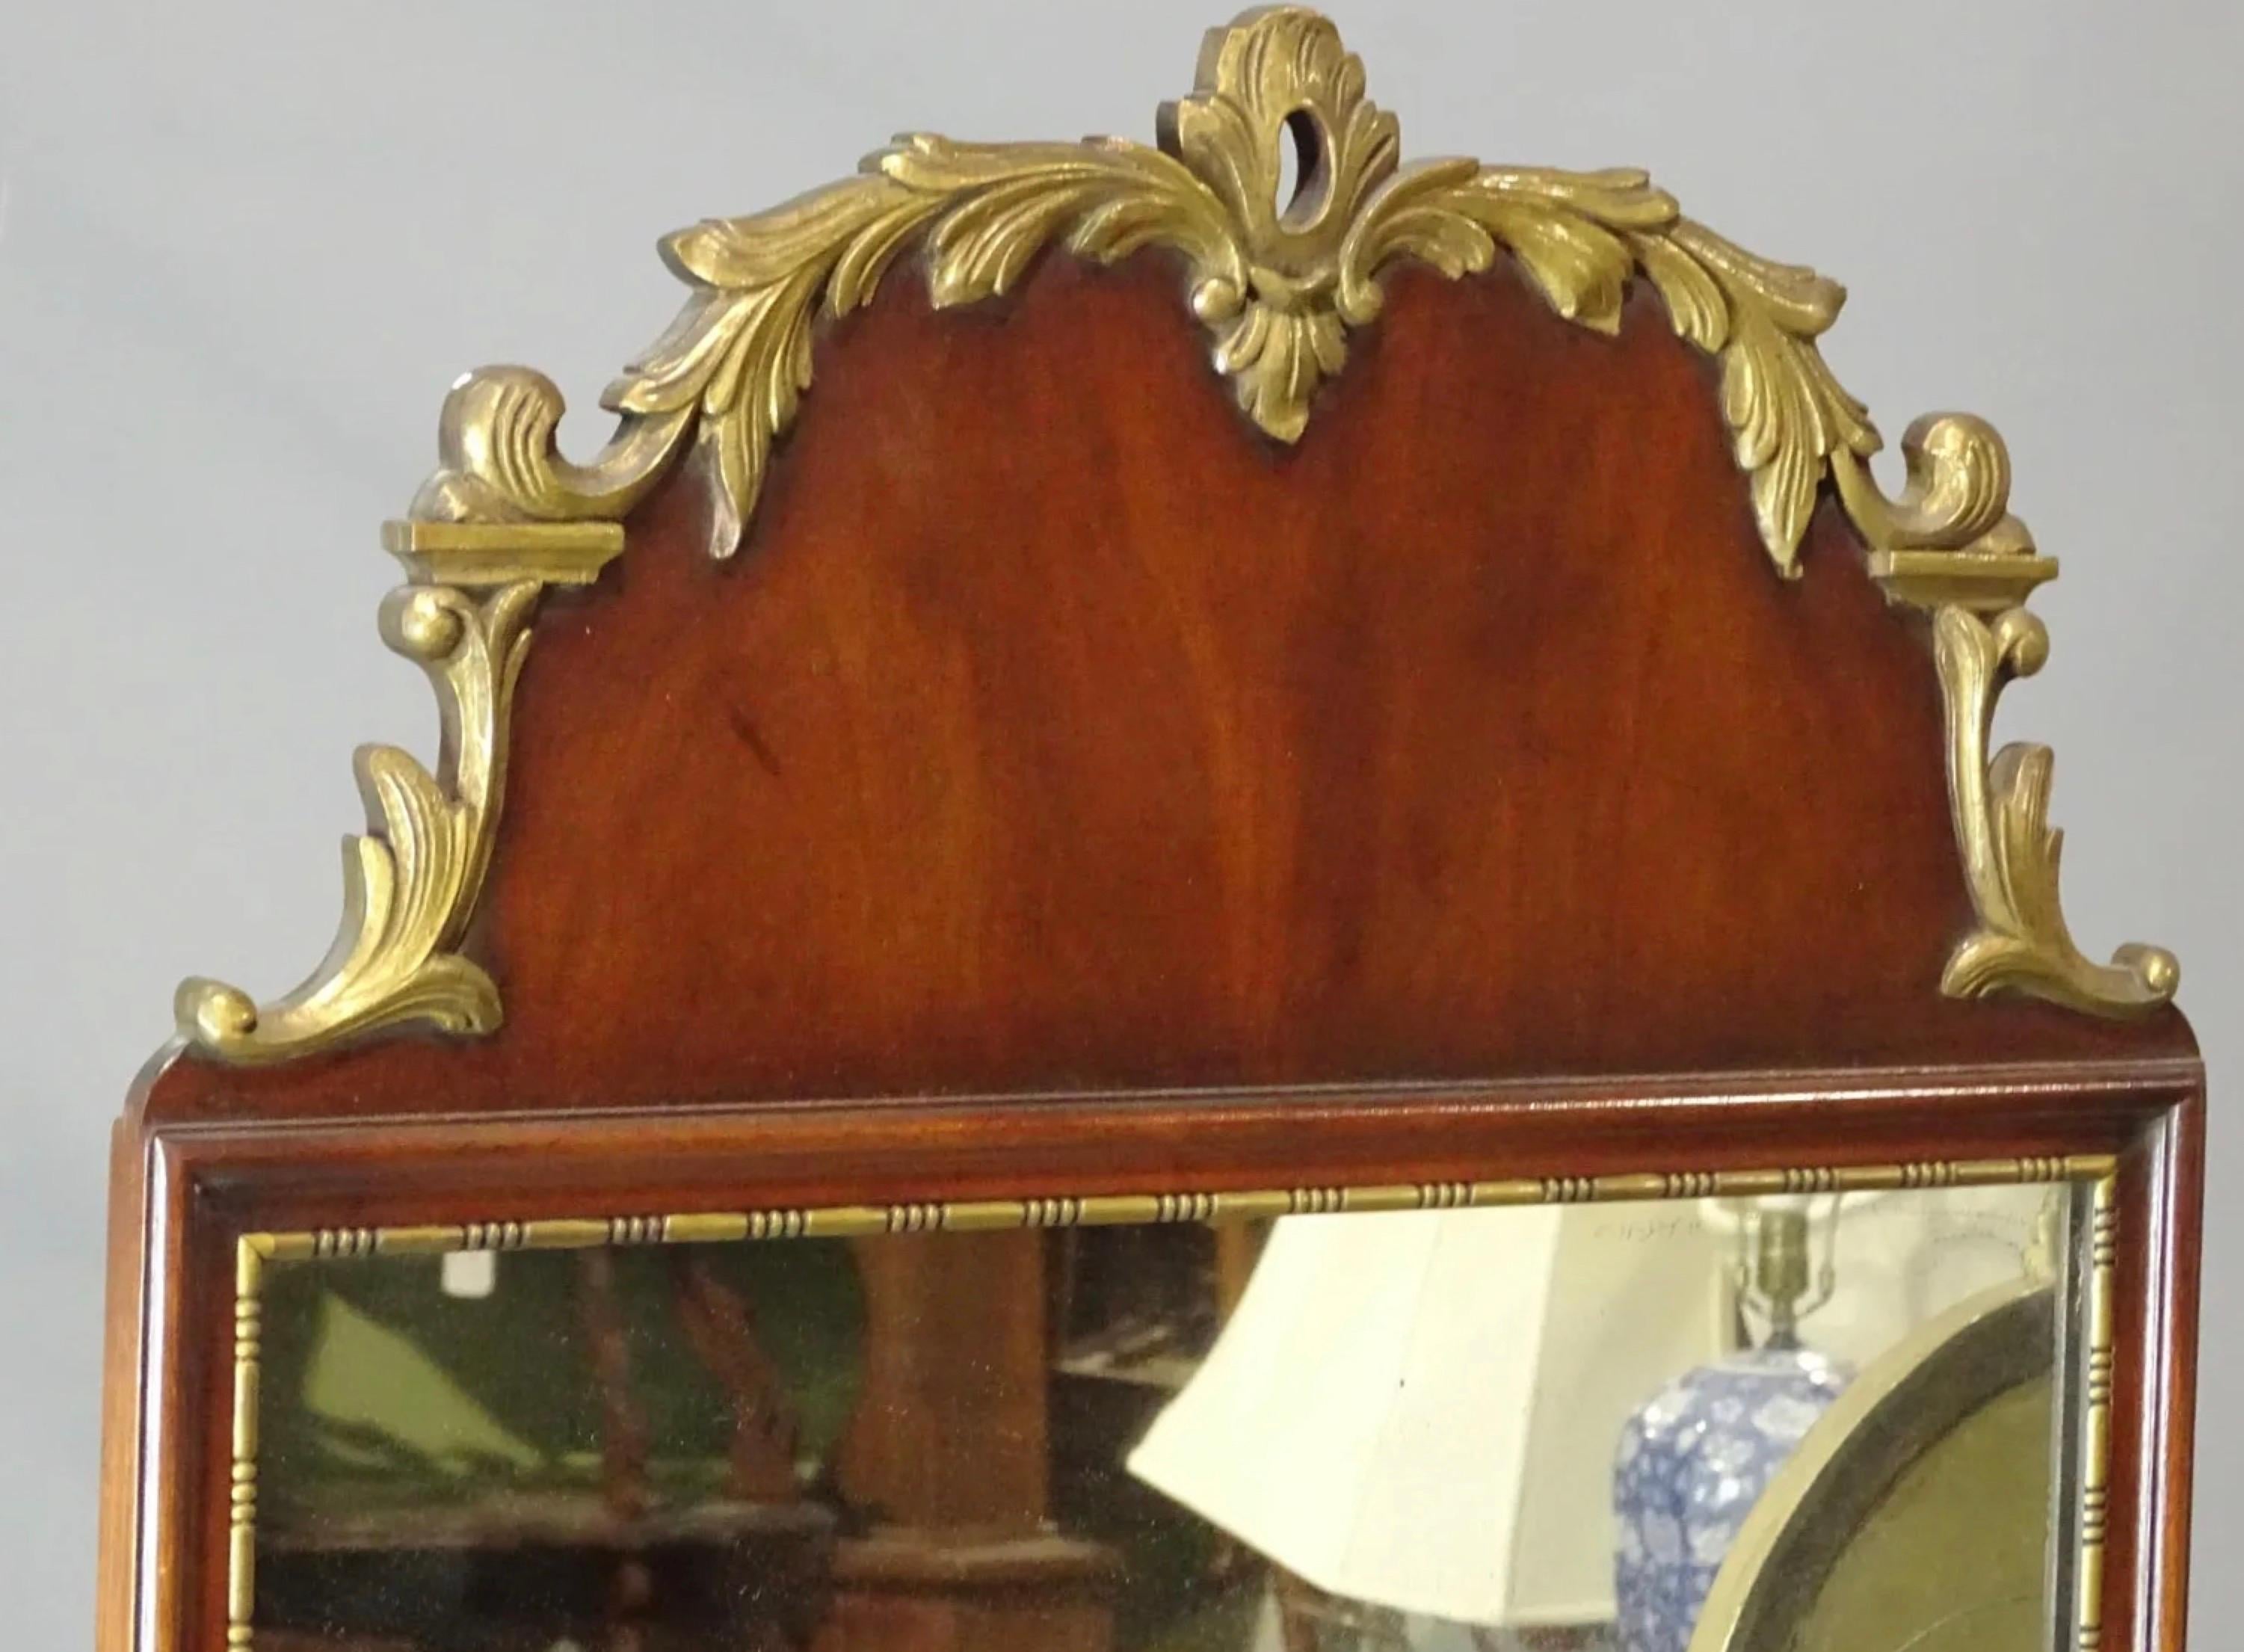 Vintage mahogany Queen Anne style mirror with carved, gilded decoration at the top and beaded gilt trim around the mirror. 
Search terms: Regency style mirror, Georgian Style mirror, 
Mantel mirrors and fireplace mirrors.
Pier mirrors and console